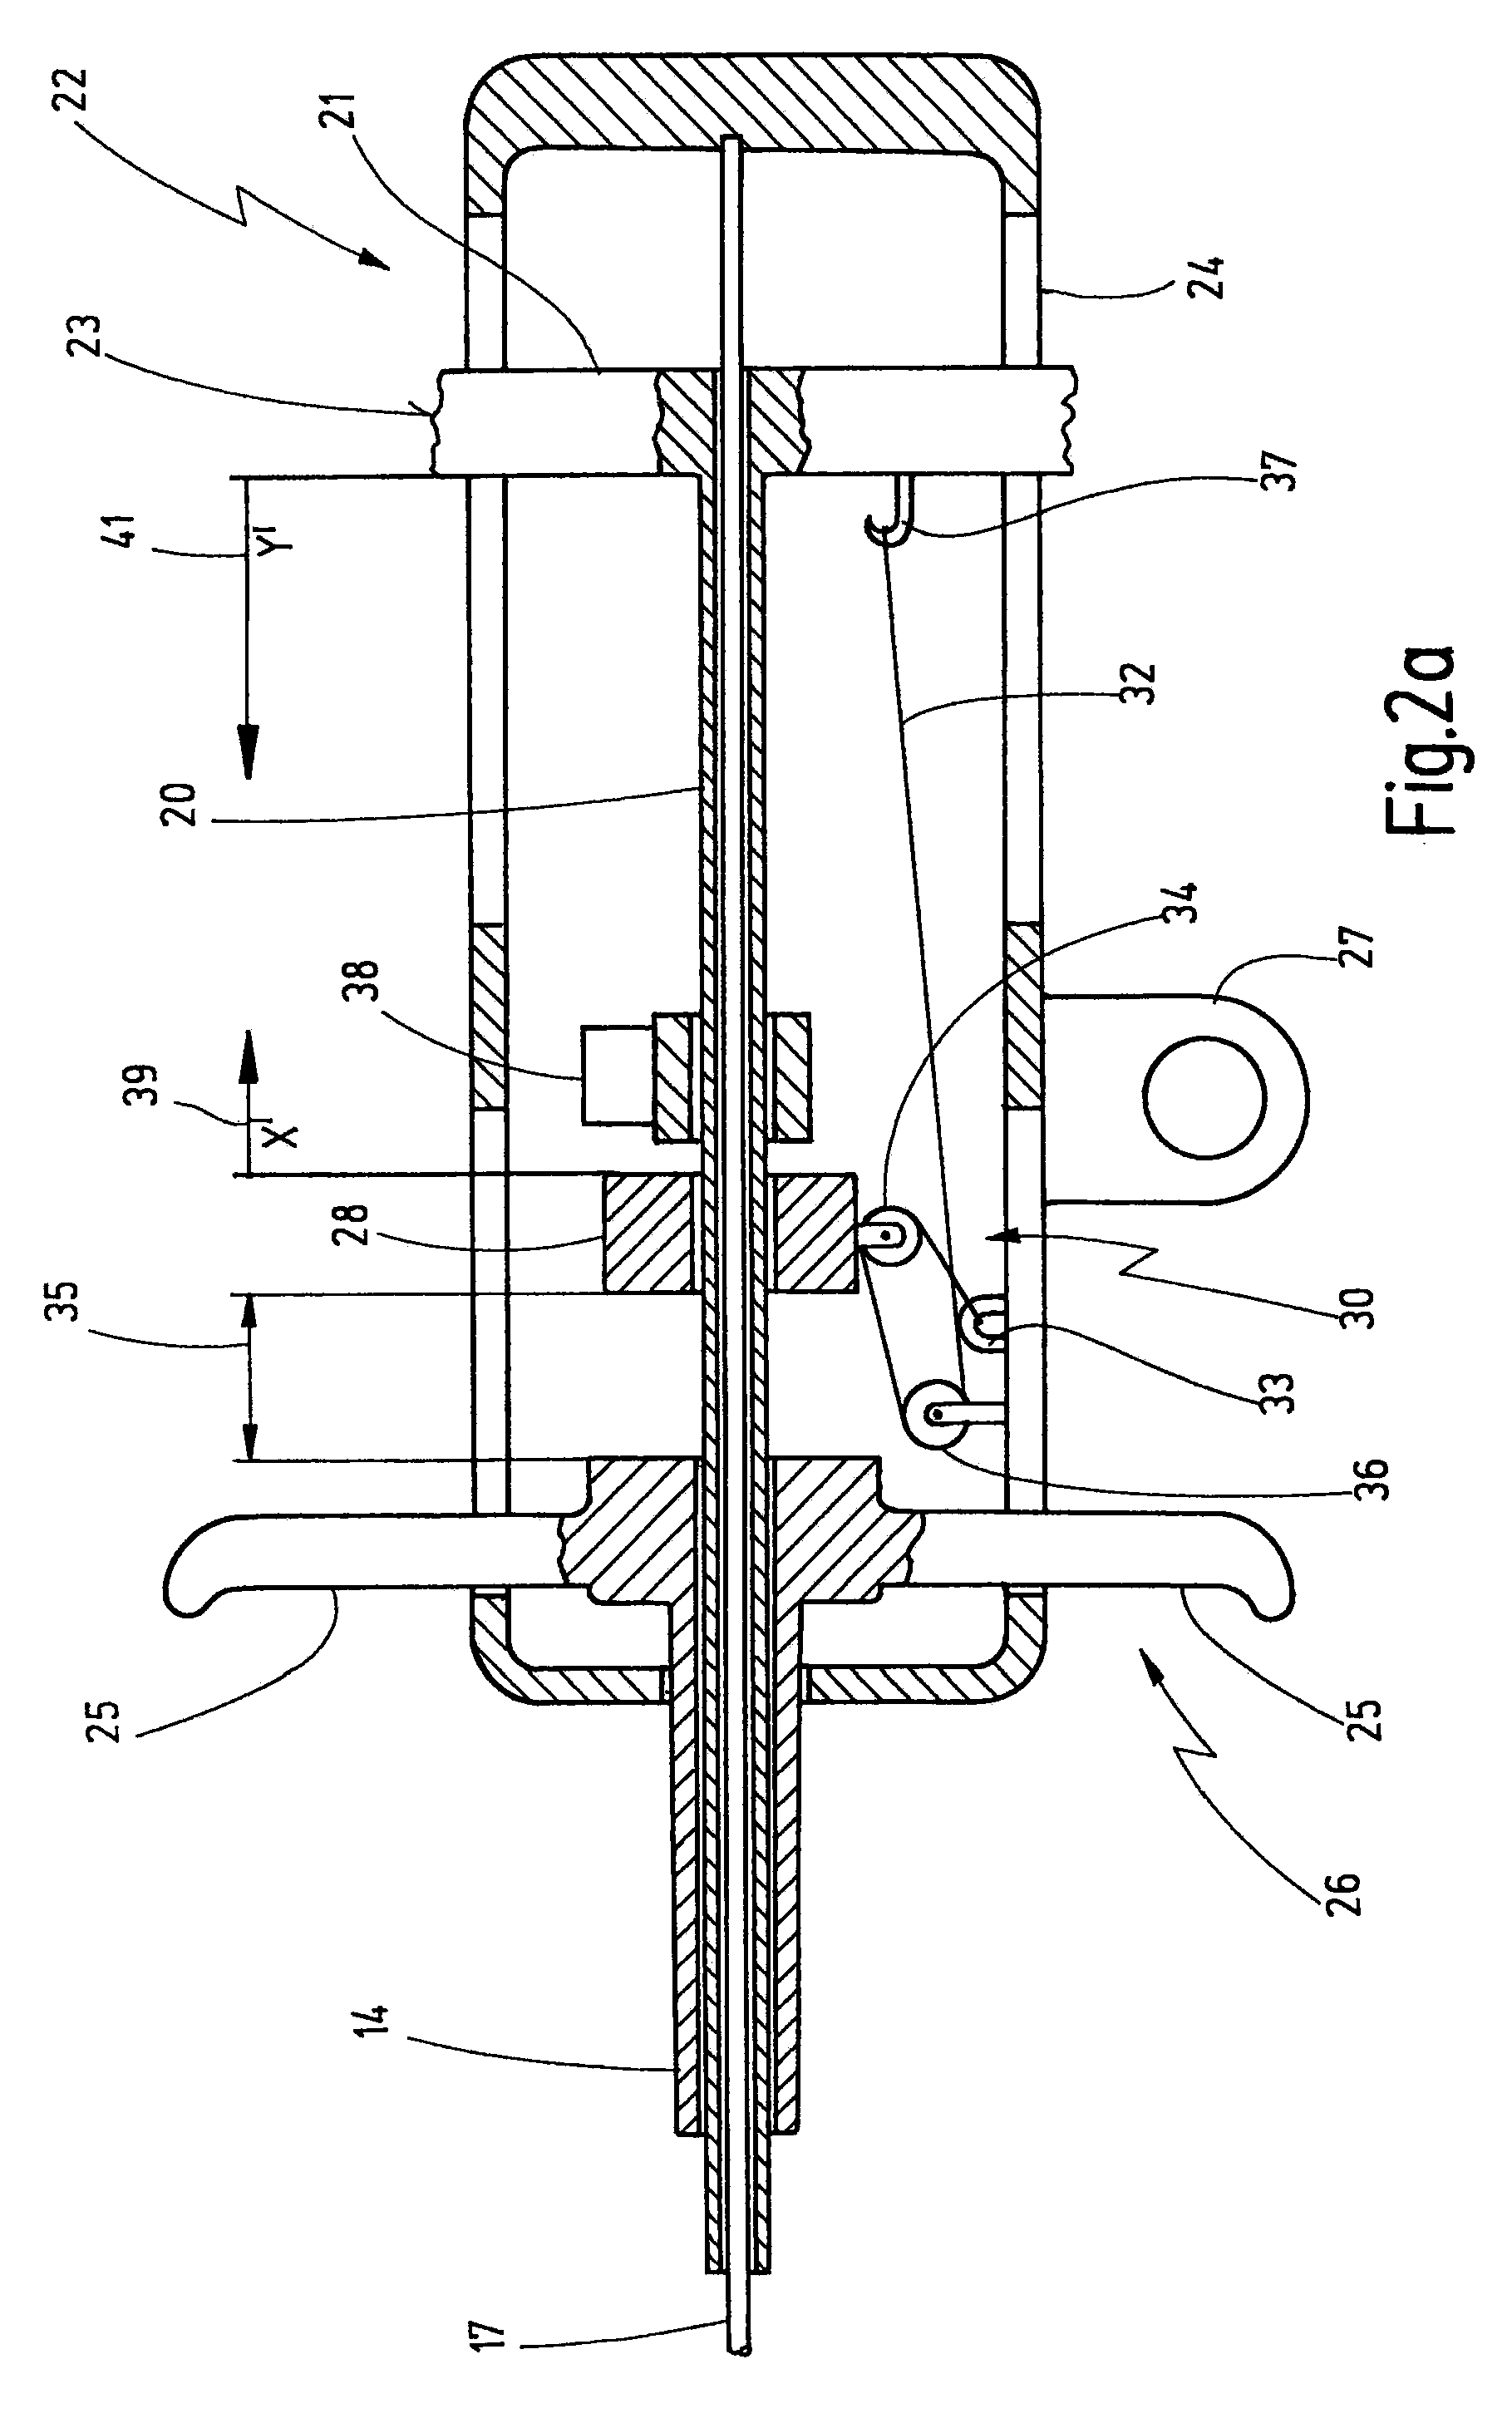 Insertion system for stents, comprising tension-compression kinematics